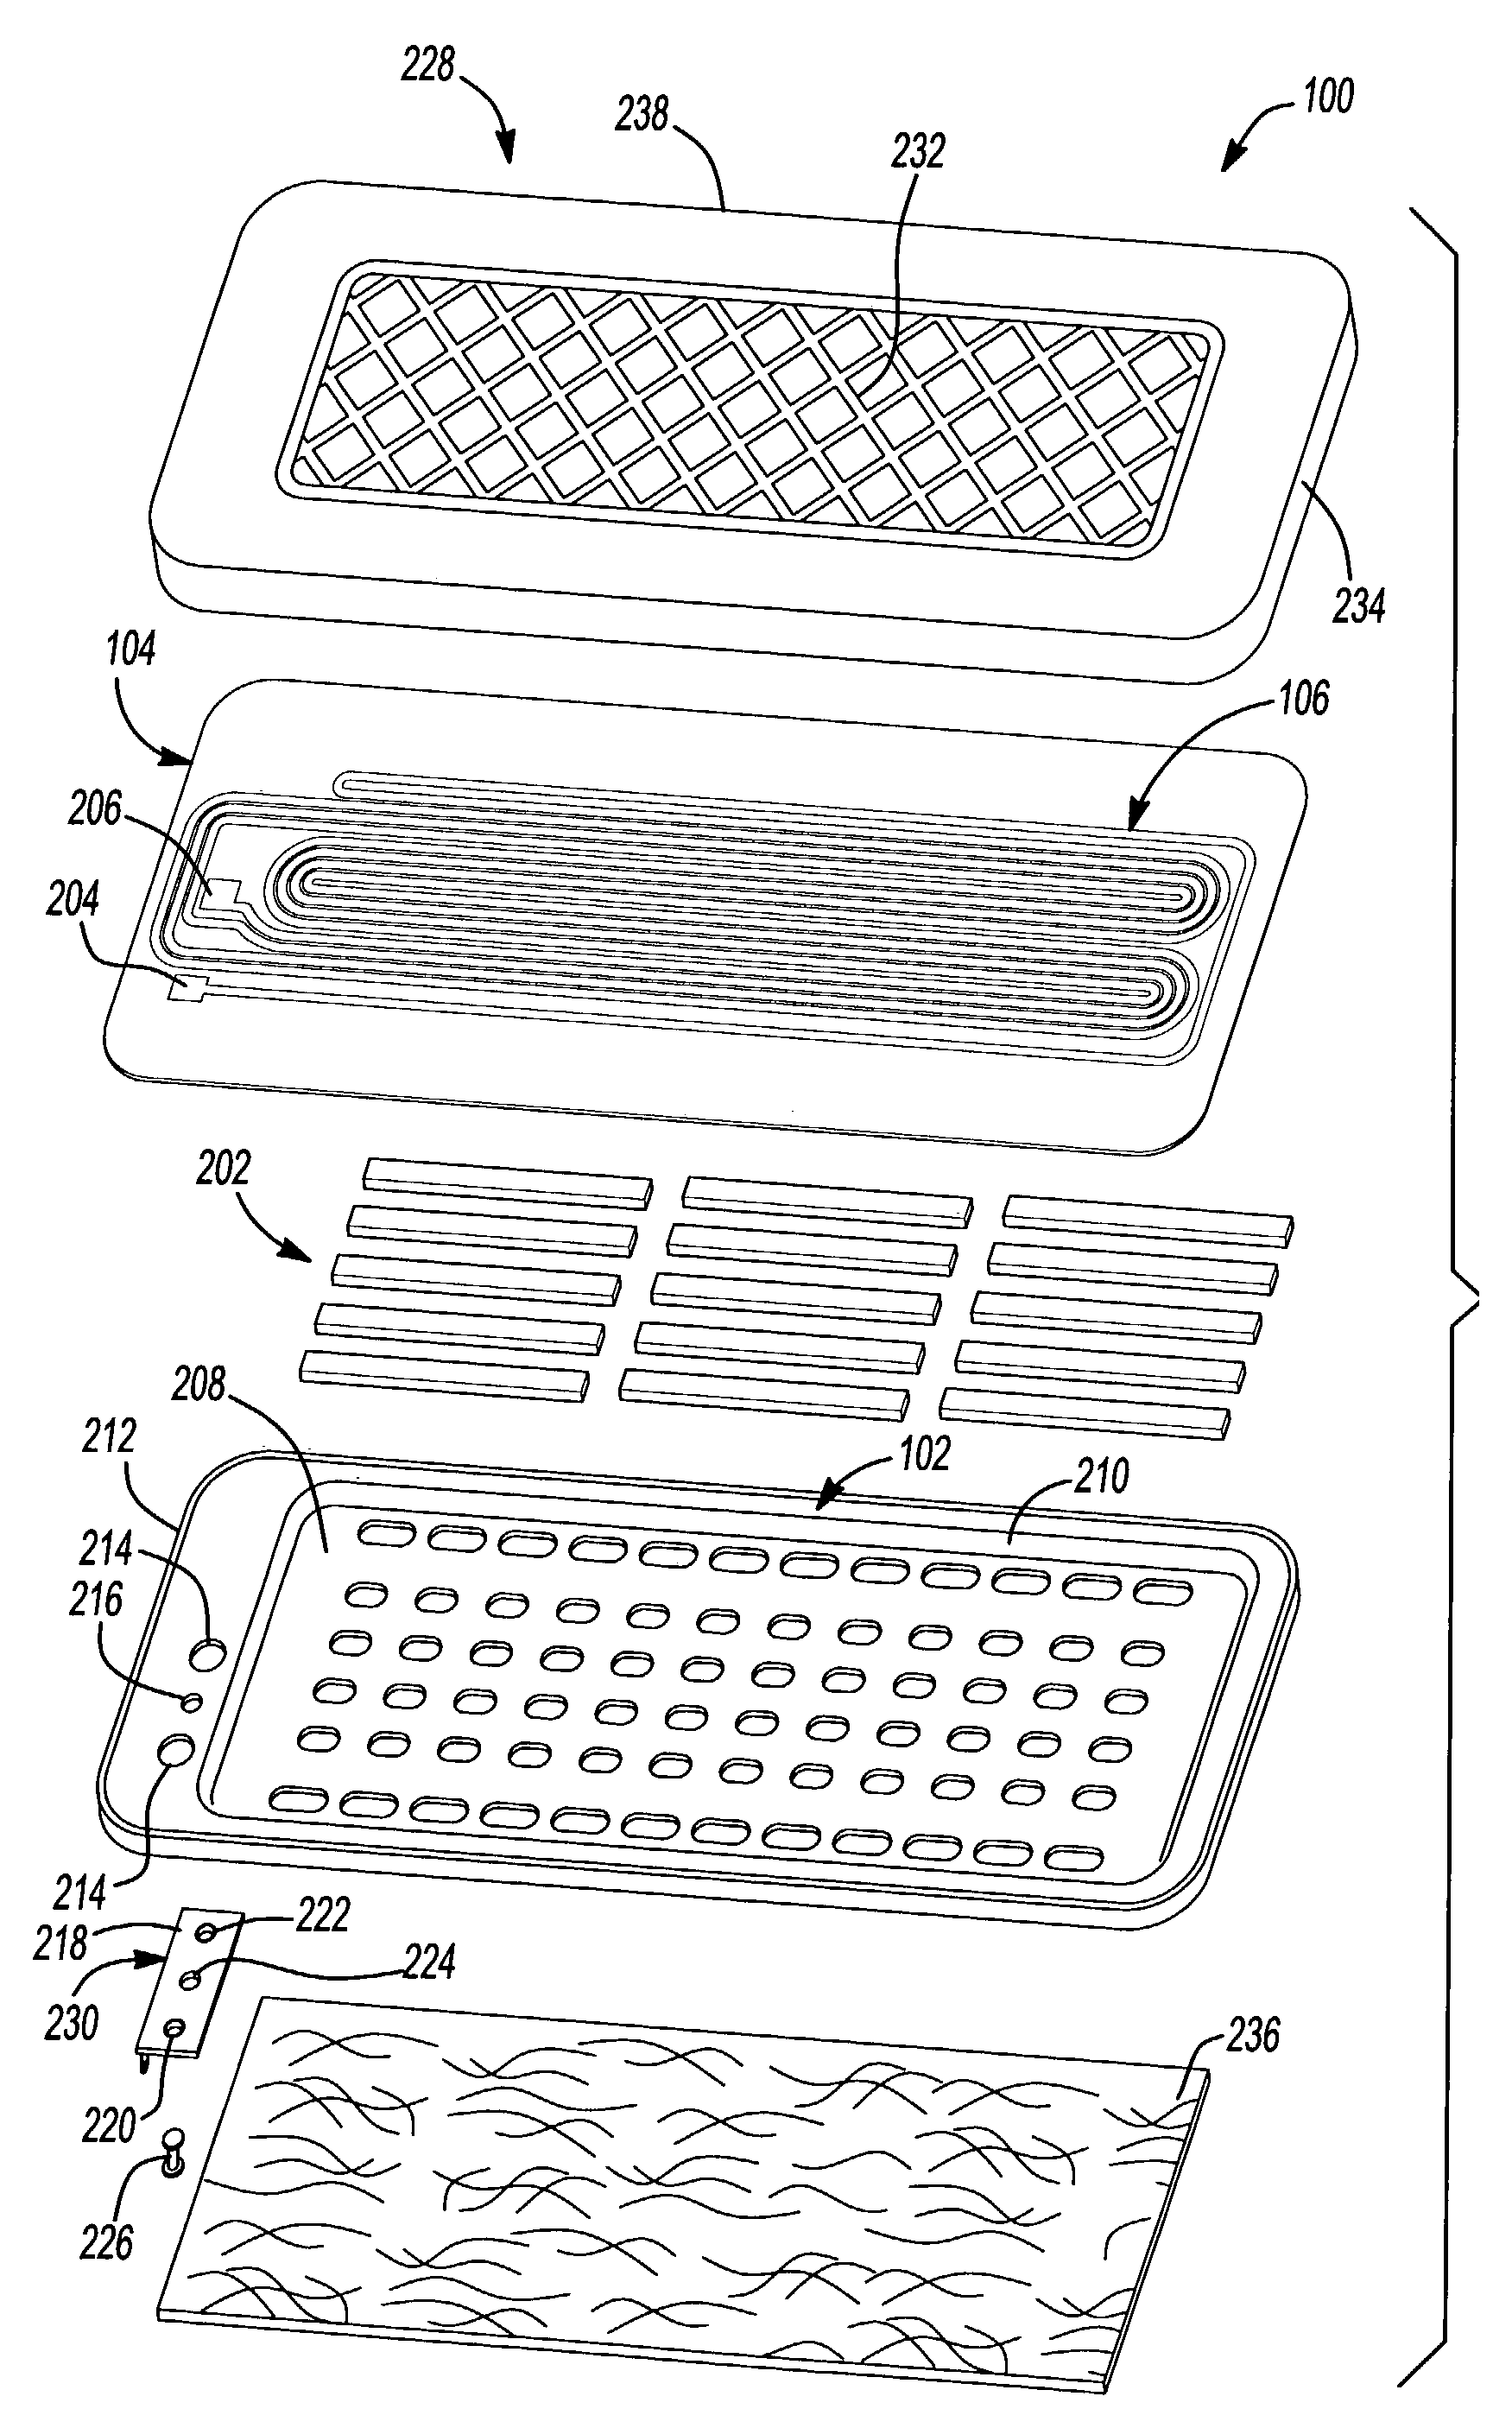 Conductors for electro-dynamic loudspeakers